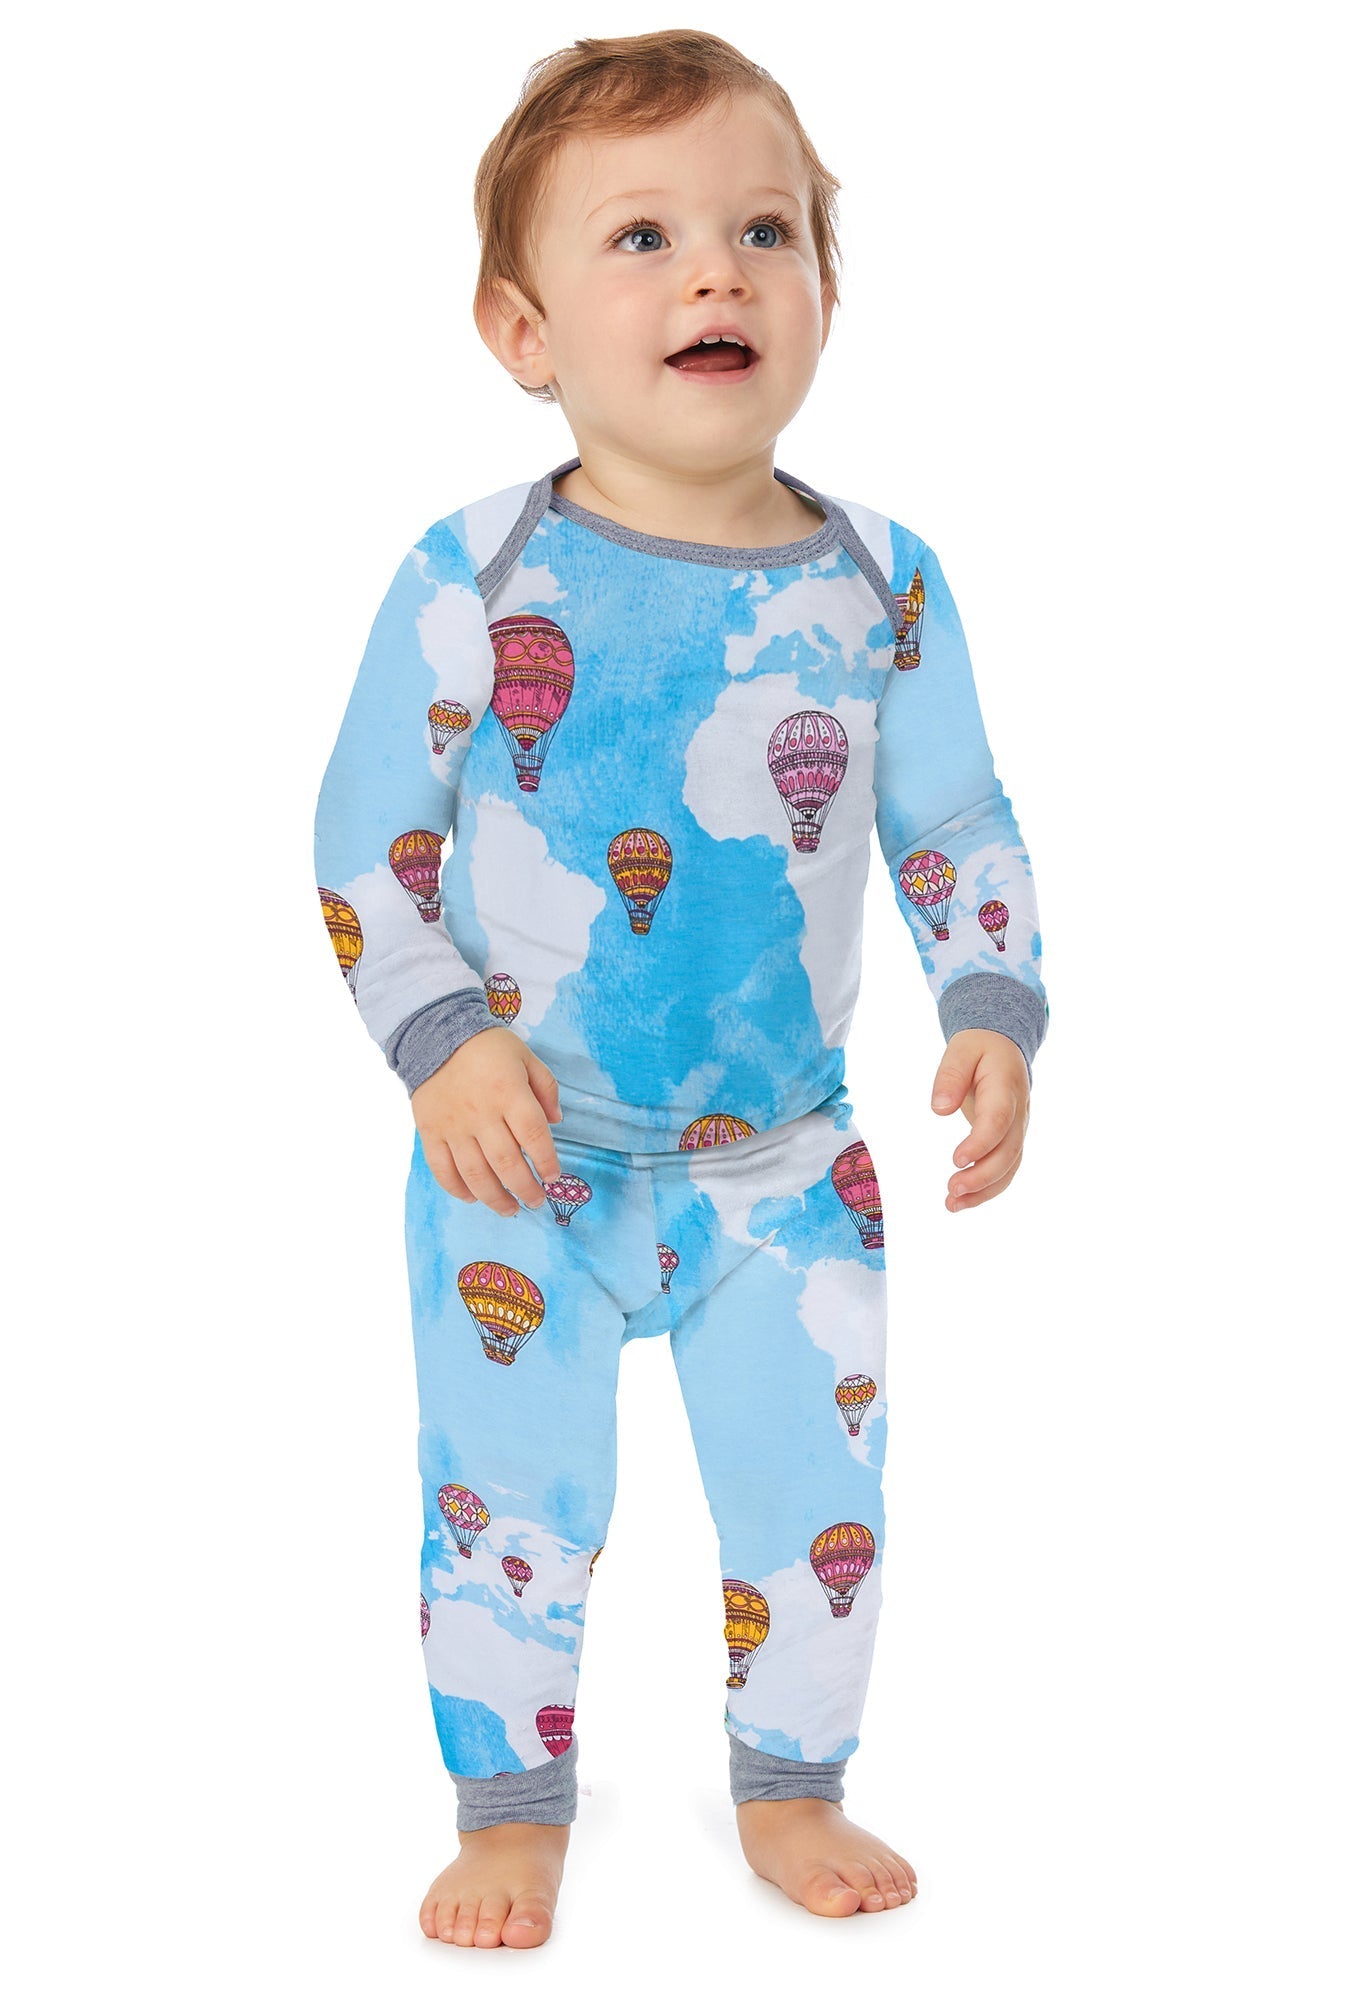 A baby wearing a long sleeve pj set with parachute in the sky pattern.